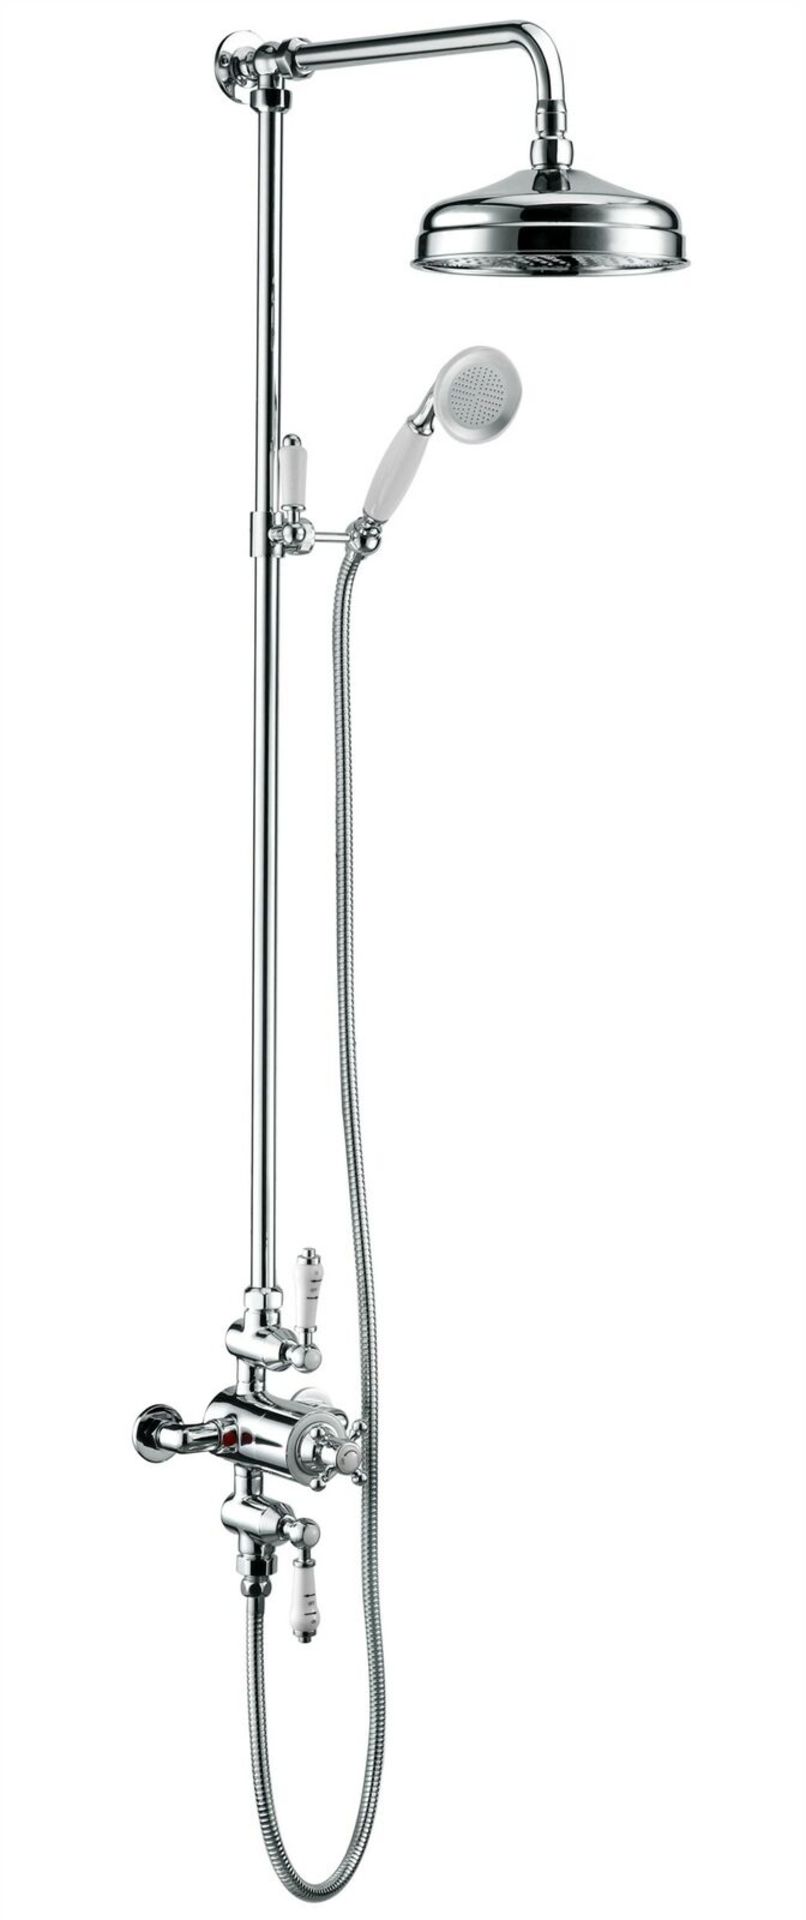 NEW (F34) Exposed Dual Traditional Thermostatic Shower Mixer + Rigid Riser + Diverter. RRP £49... - Image 3 of 3